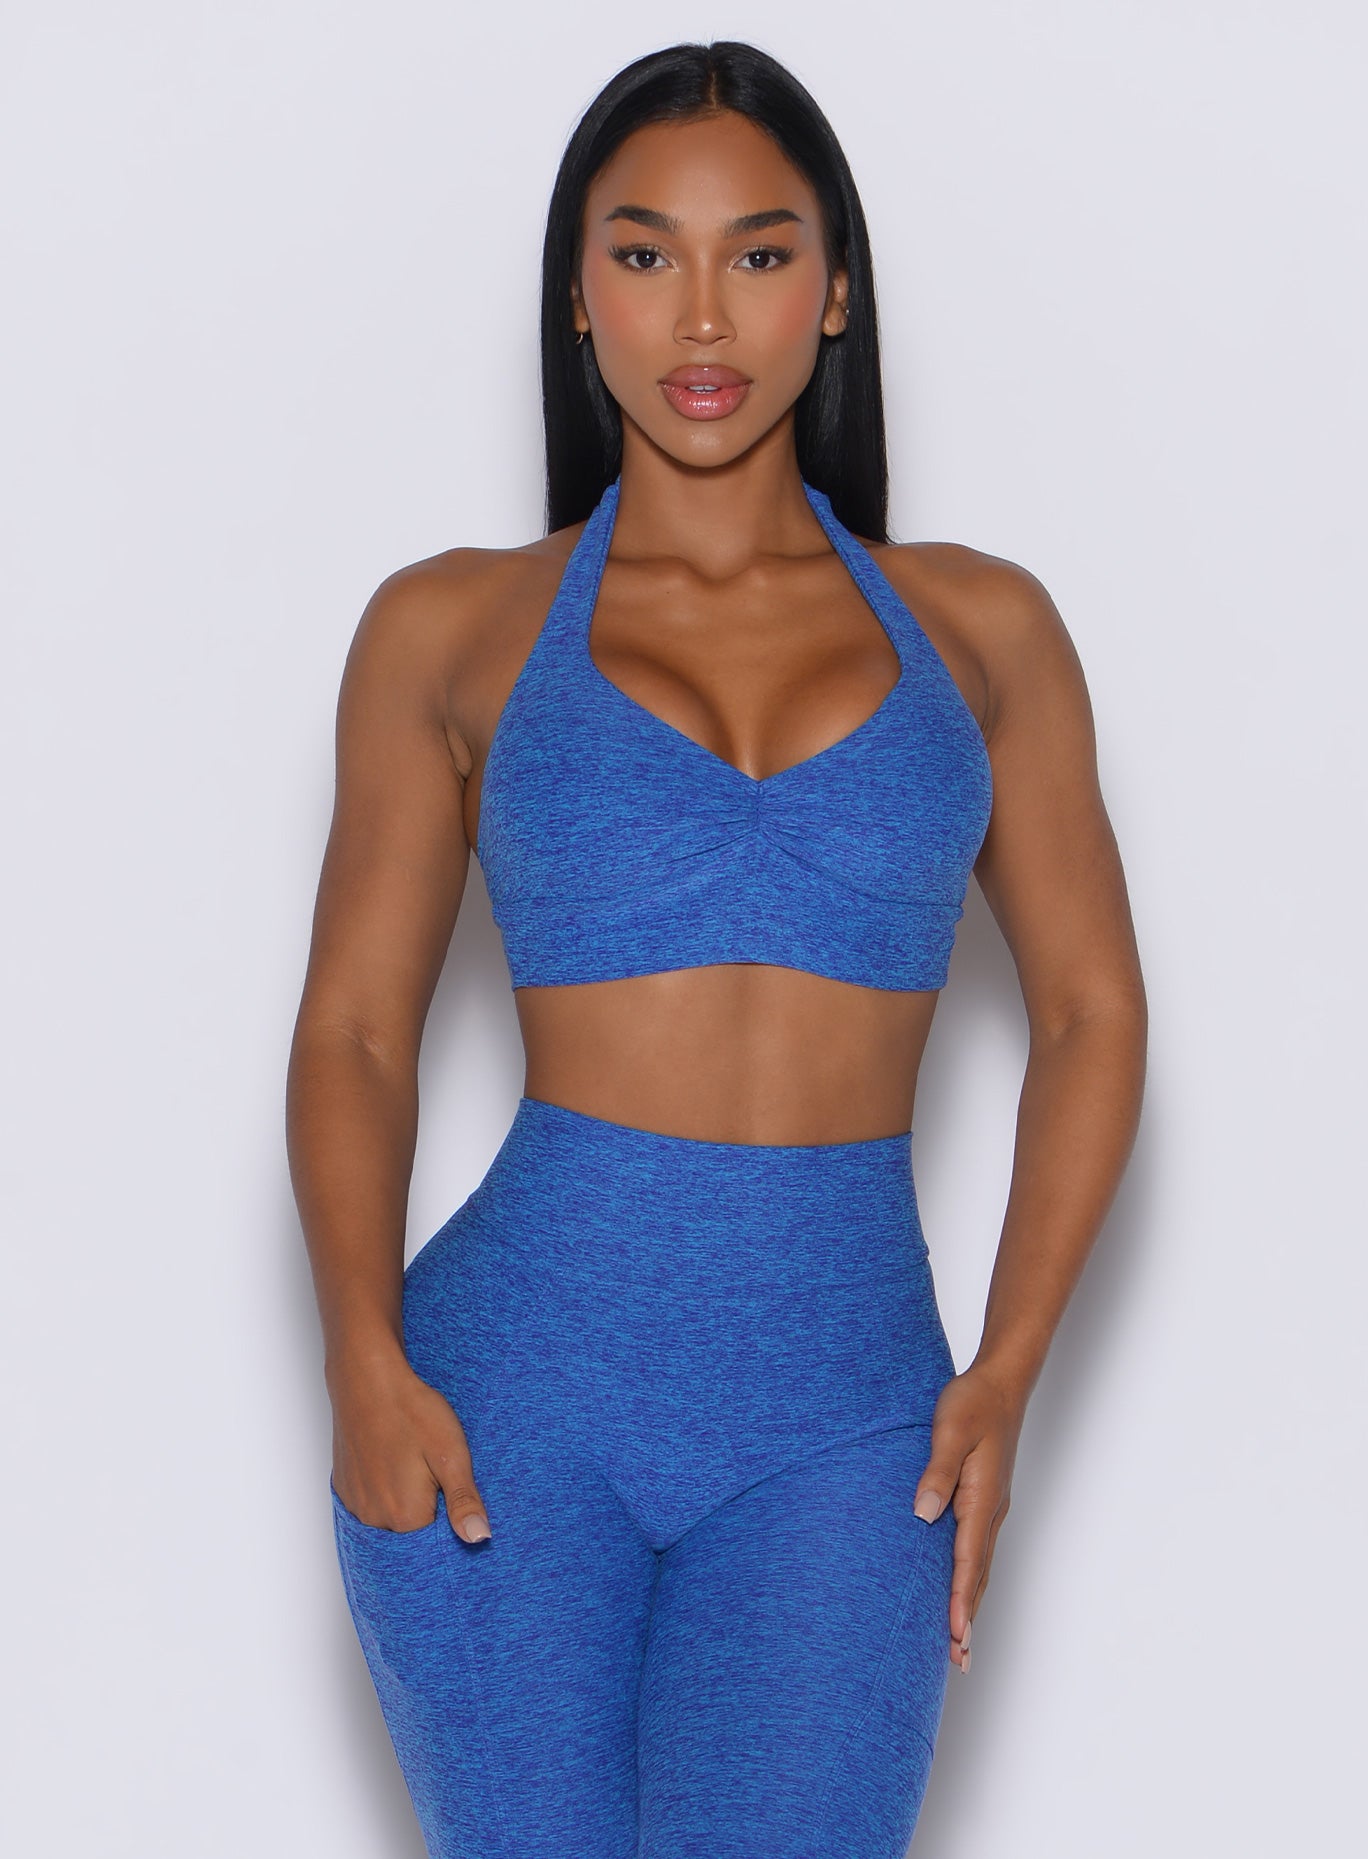 front profile picture of a model wearing our backless bra in Neon blue rave color along with the matching leggings